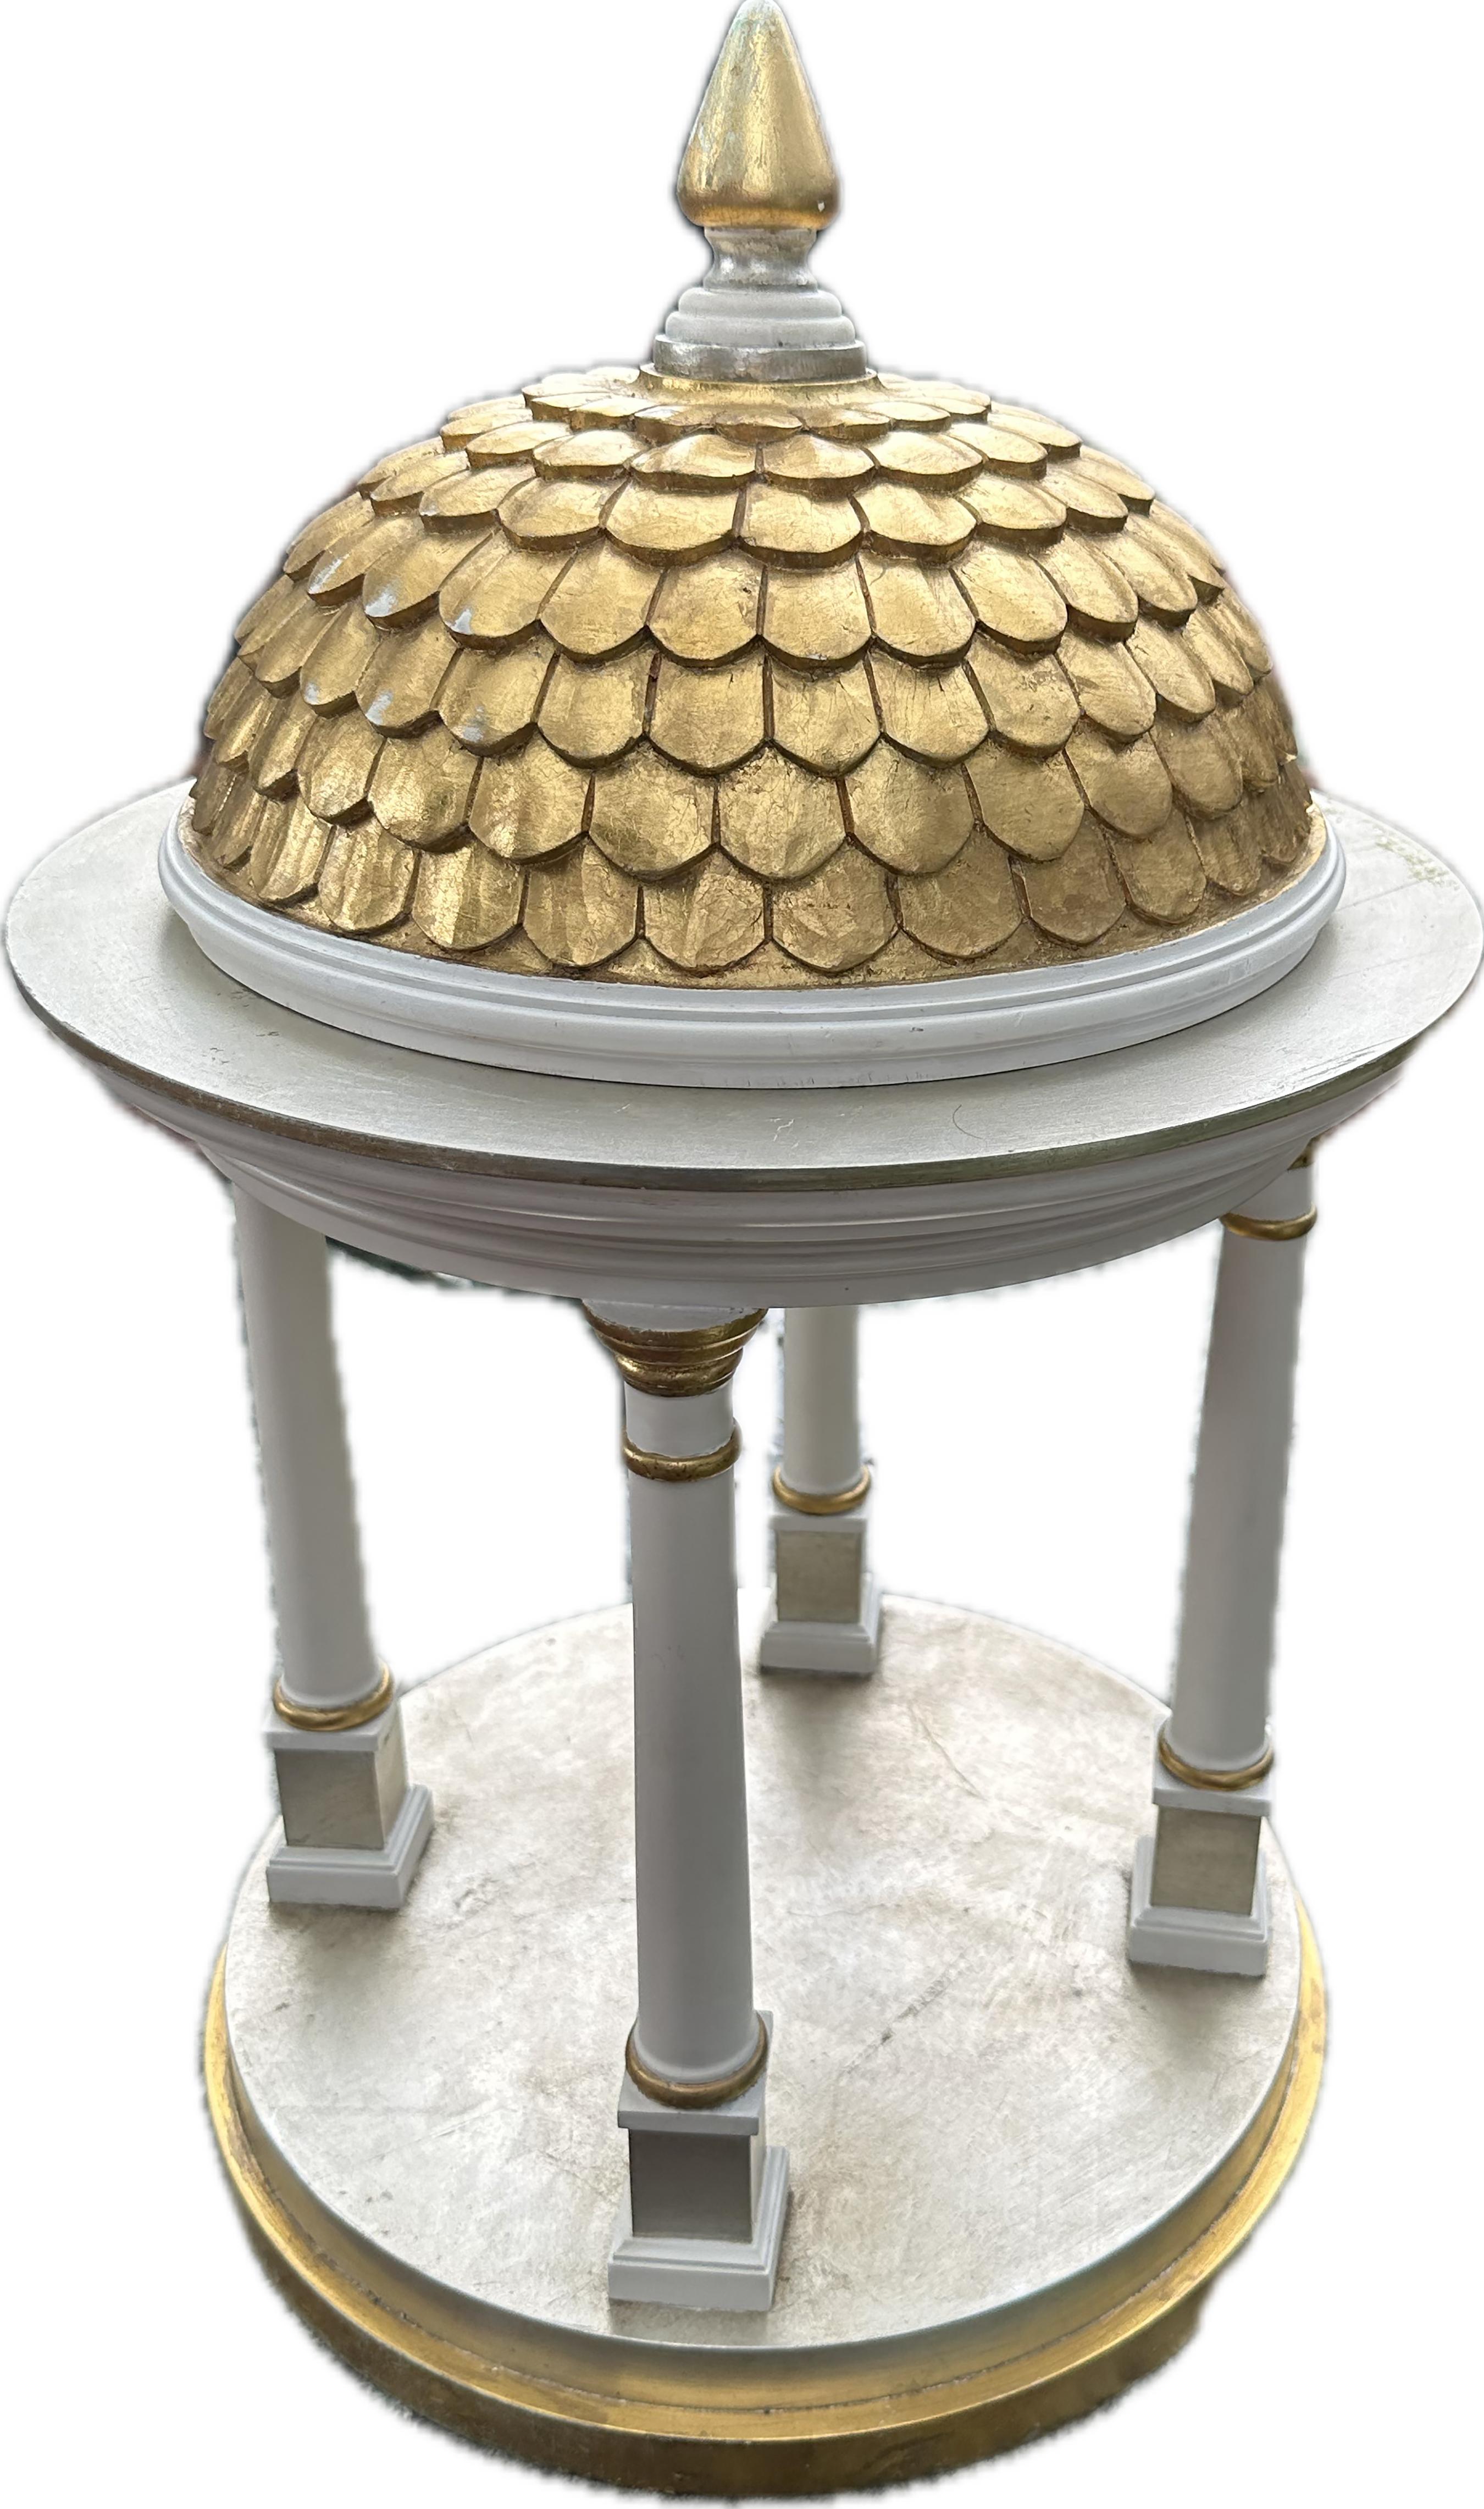 An elegant tempietto style gazebo model with a gilt Romanesque tile dome. Wood structure that is painted white. Supported by four columns with gilt trim and accented by a final. Circular base has gilt trim as well. Created in the spirit of the great